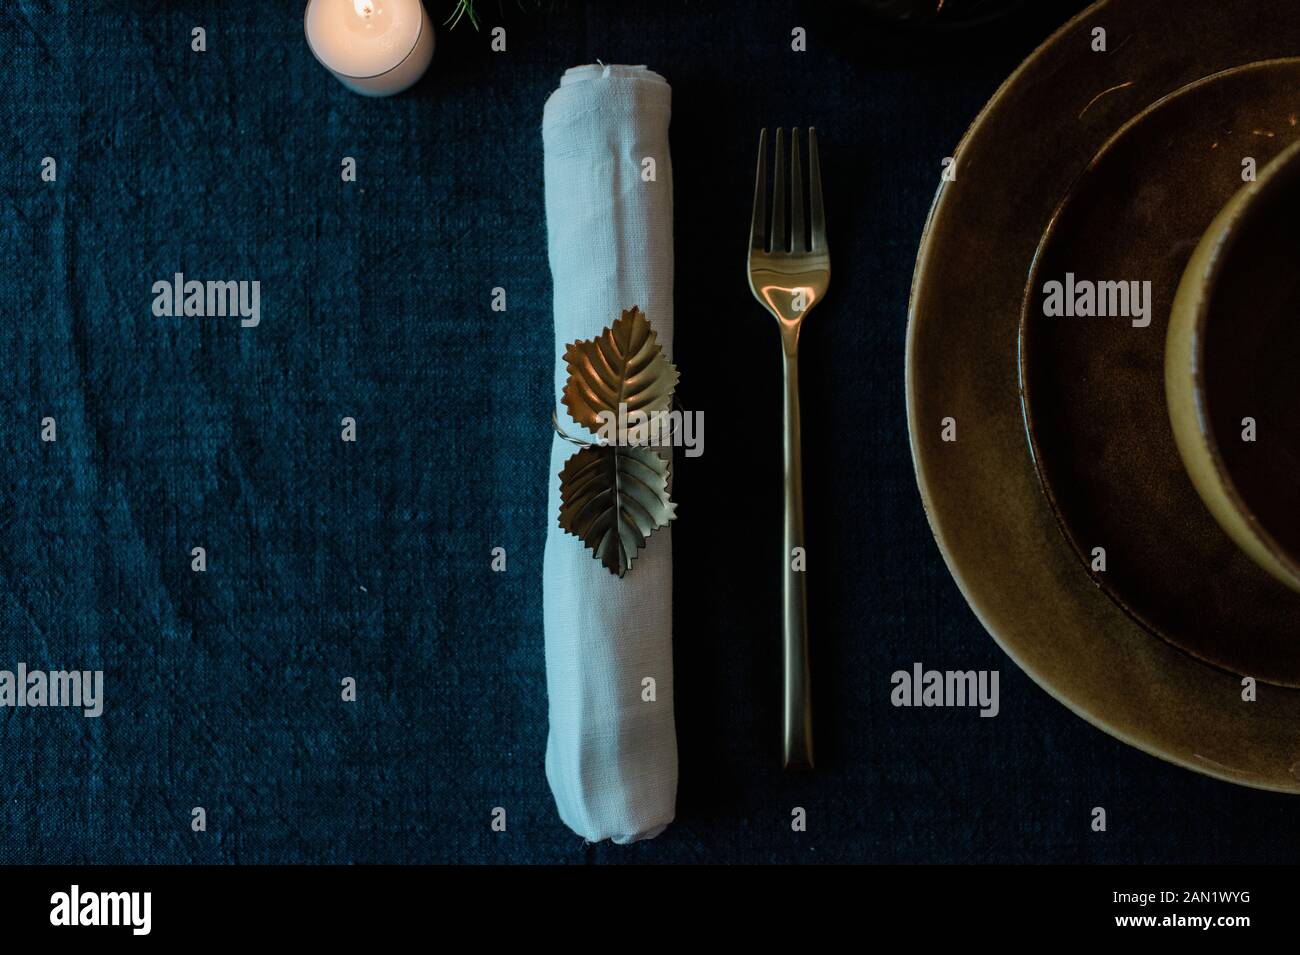 sky view of a gold dinner table setting Stock Photo